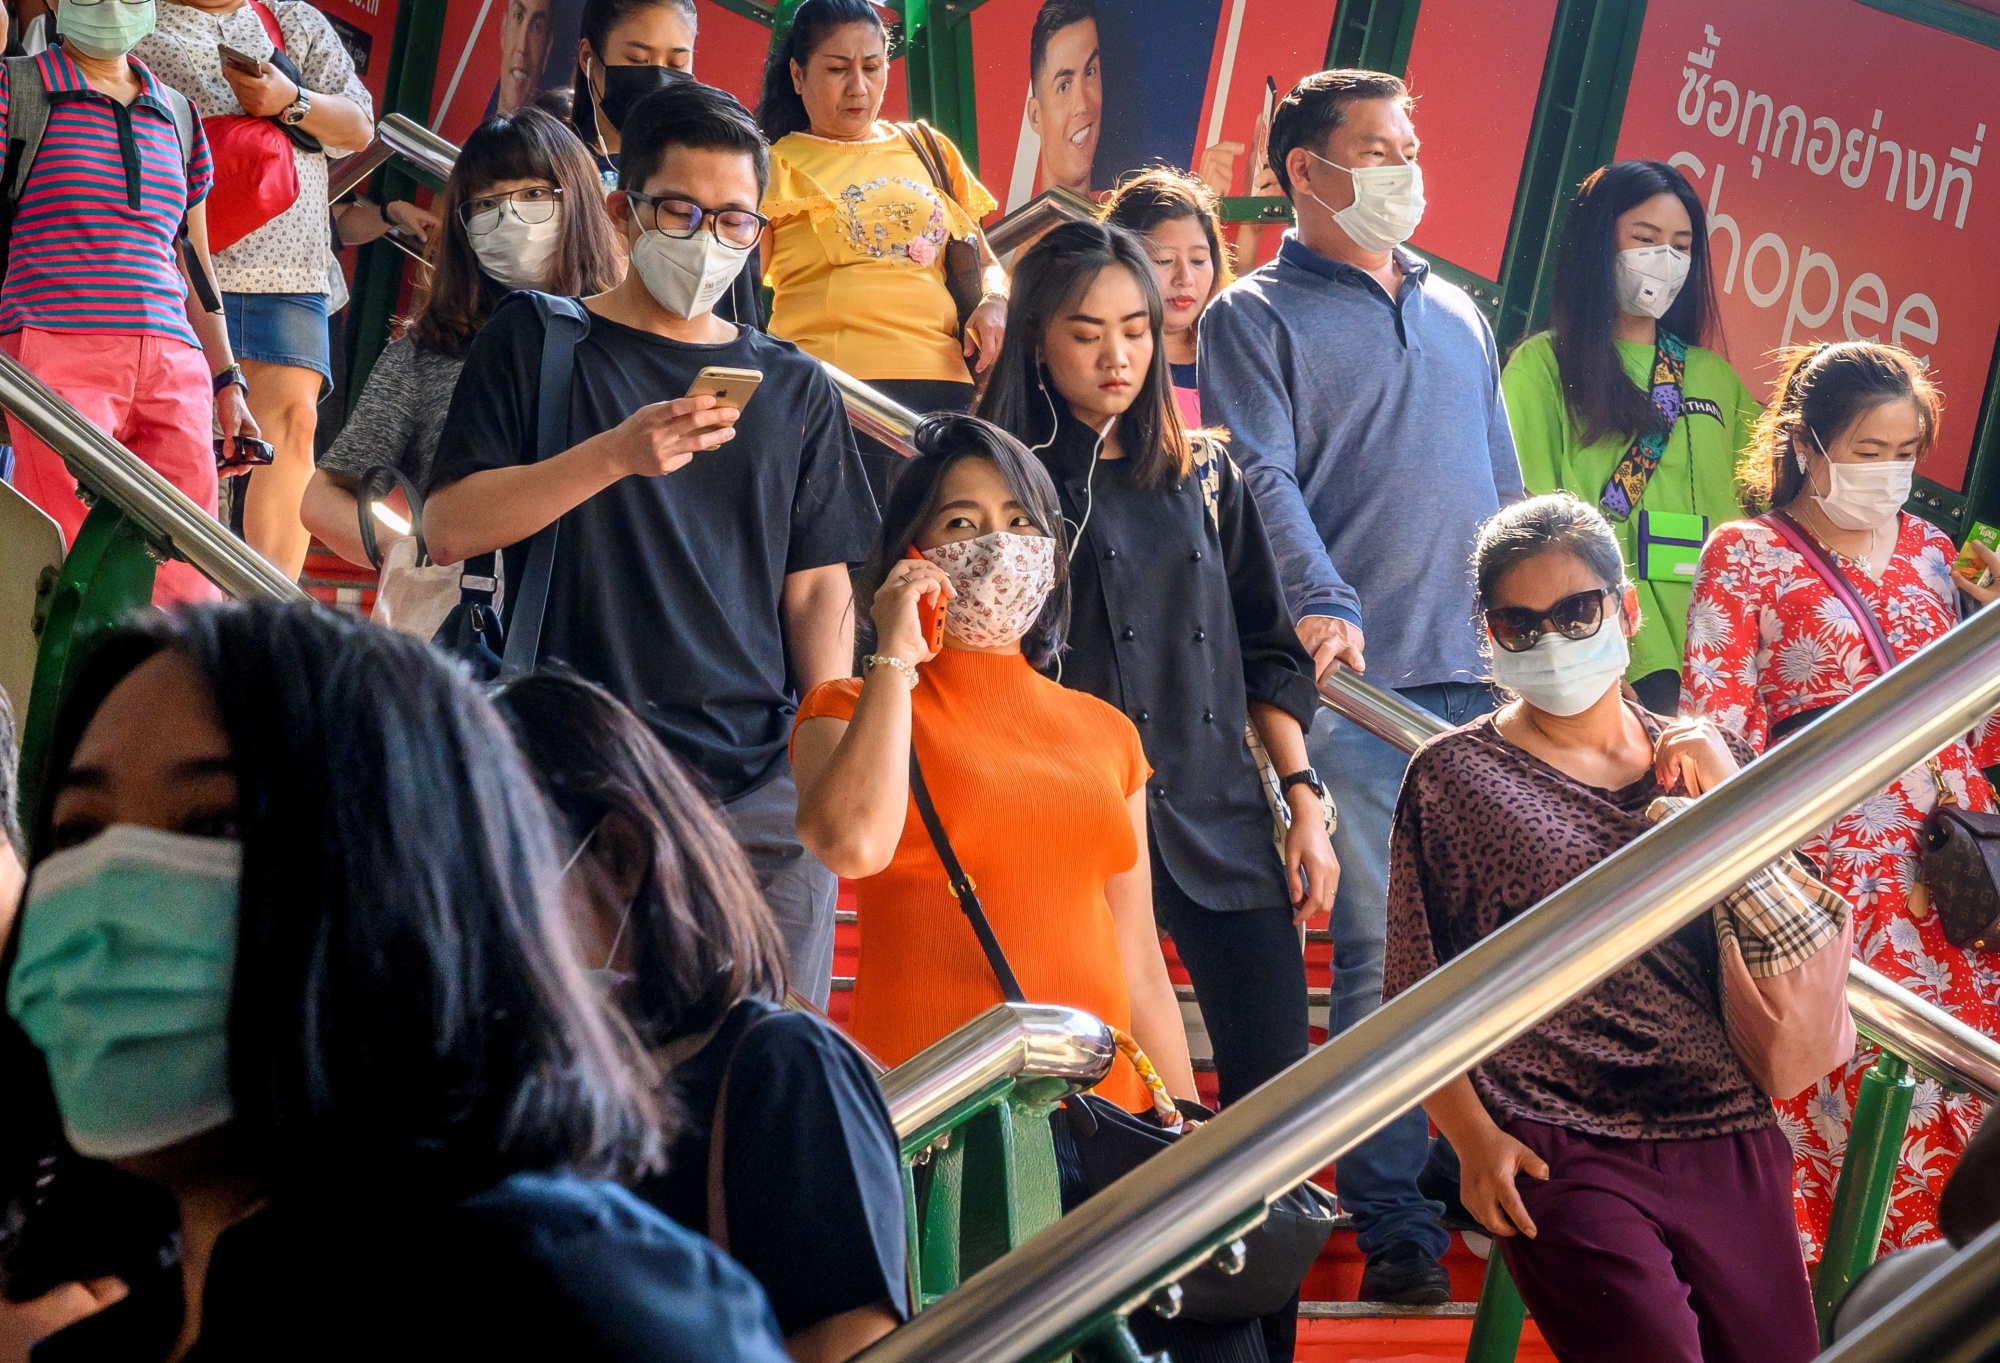 Tourists and commuters in Bangkok on Jan. 28.